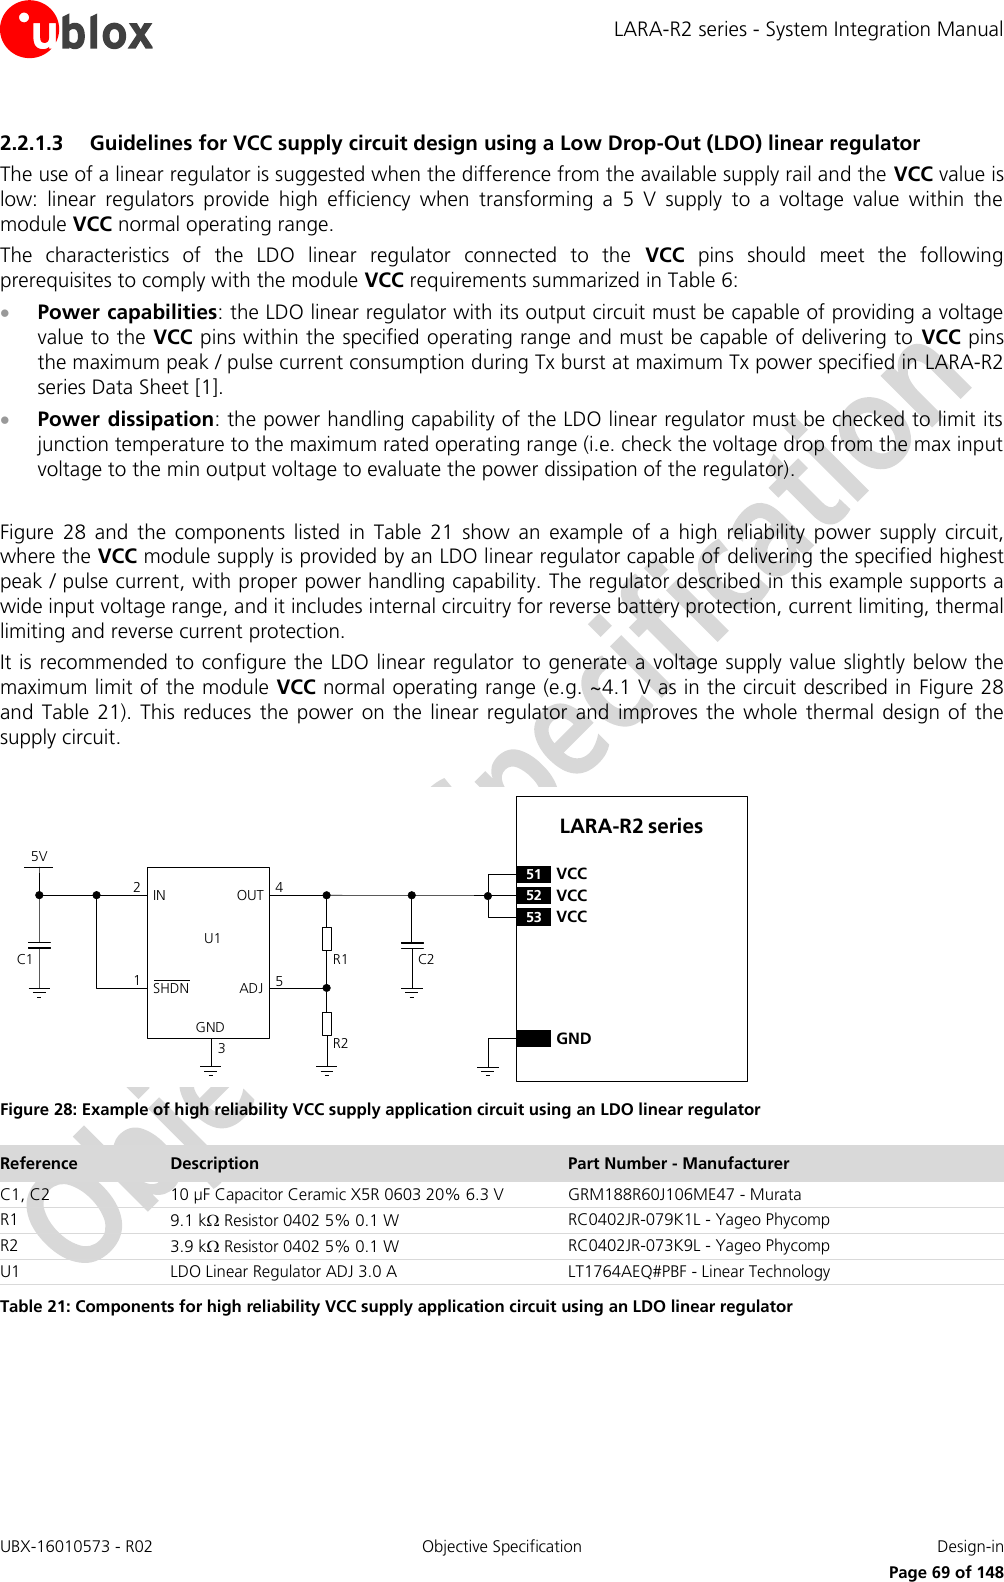 LARA-R2 series - System Integration Manual UBX-16010573 - R02  Objective Specification  Design-in     Page 69 of 148 2.2.1.3 Guidelines for VCC supply circuit design using a Low Drop-Out (LDO) linear regulator The use of a linear regulator is suggested when the difference from the available supply rail and the VCC value is low:  linear  regulators  provide  high  efficiency  when  transforming  a  5  V  supply  to  a  voltage  value  within  the module VCC normal operating range. The  characteristics  of  the  LDO  linear  regulator  connected  to  the  VCC  pins  should  meet  the  following prerequisites to comply with the module VCC requirements summarized in Table 6:  Power capabilities: the LDO linear regulator with its output circuit must be capable of providing a voltage value to the VCC pins within the specified operating range and must be capable of delivering to  VCC pins the maximum peak / pulse current consumption during Tx burst at maximum Tx power specified in LARA-R2 series Data Sheet [1].  Power dissipation: the power handling capability of the LDO linear regulator must be checked to limit its junction temperature to the maximum rated operating range (i.e. check the voltage drop from the max input voltage to the min output voltage to evaluate the power dissipation of the regulator).  Figure  28  and  the  components  listed  in  Table  21  show  an  example  of  a  high  reliability  power  supply  circuit, where the VCC module supply is provided by an LDO linear regulator capable of delivering the specified highest peak / pulse current, with proper power handling capability. The regulator described in this example supports a wide input voltage range, and it includes internal circuitry for reverse battery protection, current limiting, thermal limiting and reverse current protection. It is recommended to configure the LDO linear regulator  to generate a voltage supply value slightly below the maximum limit of the module VCC normal operating range (e.g. ~4.1 V as in the circuit described in  Figure 28 and  Table  21).  This reduces  the  power on  the  linear  regulator  and  improves  the  whole  thermal  design of  the supply circuit.  5VC1IN OUTADJGND12453C2R1R2U1SHDNLARA-R2 series52 VCC53 VCC51 VCCGND Figure 28: Example of high reliability VCC supply application circuit using an LDO linear regulator Reference Description Part Number - Manufacturer C1, C2 10 µF Capacitor Ceramic X5R 0603 20% 6.3 V GRM188R60J106ME47 - Murata R1 9.1 k Resistor 0402 5% 0.1 W RC0402JR-079K1L - Yageo Phycomp R2 3.9 k Resistor 0402 5% 0.1 W RC0402JR-073K9L - Yageo Phycomp U1 LDO Linear Regulator ADJ 3.0 A LT1764AEQ#PBF - Linear Technology Table 21: Components for high reliability VCC supply application circuit using an LDO linear regulator  